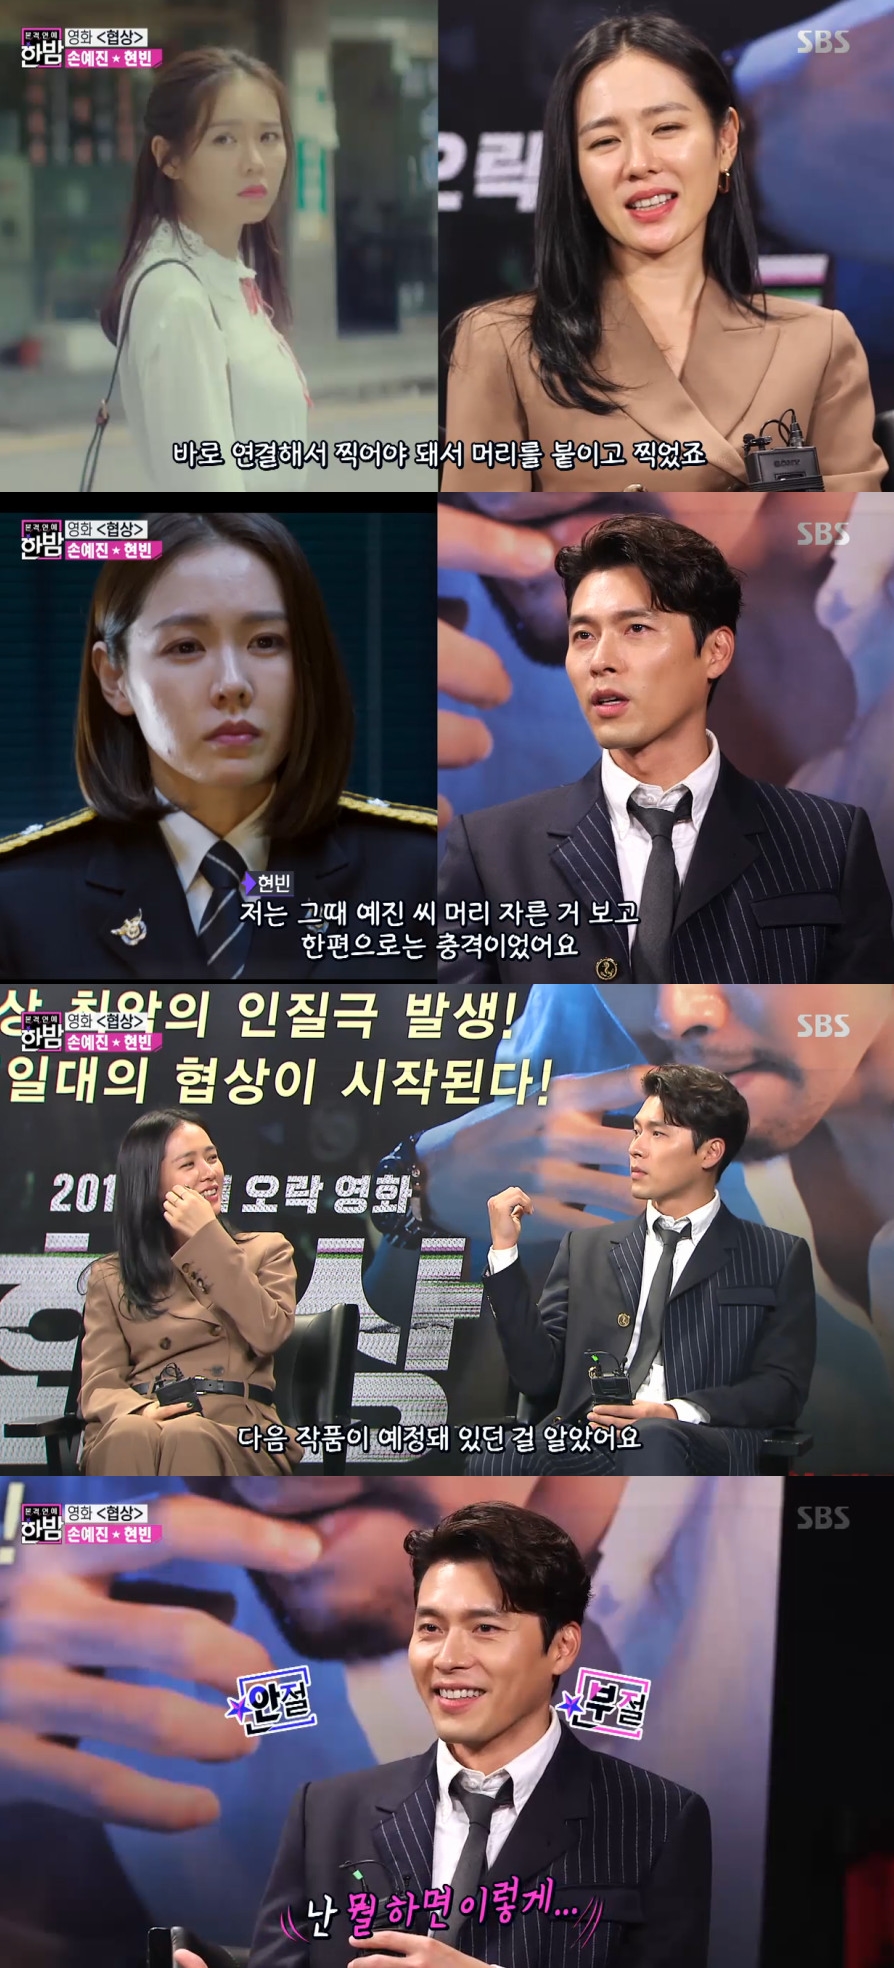 Hyun Bin confesses she was shocked by Son Ye-jins bold transformationIn SBS Full Entertainment Midnight broadcast on September 11, interviews with actors Son Ye-jin and Hyun Bin, who are about to release the movie Movie - The Negotiation, were released.On this day, Son Ye-jin said of the first impression of Hyun Bin, I thought it was good to have skin, even my hair was really good.I thought it was a male actor who had coveted skin and hair, Hyun Bin said, I was also appearing because Yejin did it. While Son Ye-jin was the first Top Model in the police role as Movie - The Negotiation, Hyun Bin said: It was a shock to have a haircut with a bob.I knew at the time that the next work was decided. There must have been words. I was stimulated. I wanted to do something. I took the movie Im Going to Meet Now after Movie - The Negotiation; I have to connect it right away and Ive got to shoot it with my head attached, Son Ye-jin recalled.Meanwhile, Hyun Bin is attracting attention as the first villain Top Model of his life.Hyun Bin said, I played Stoker in the drama Bodyguard in 2003, but it was a short time.So Son Ye-jin said, It is funny to play with such a soft voice. I will be surprised to see the movie.bak-beauty